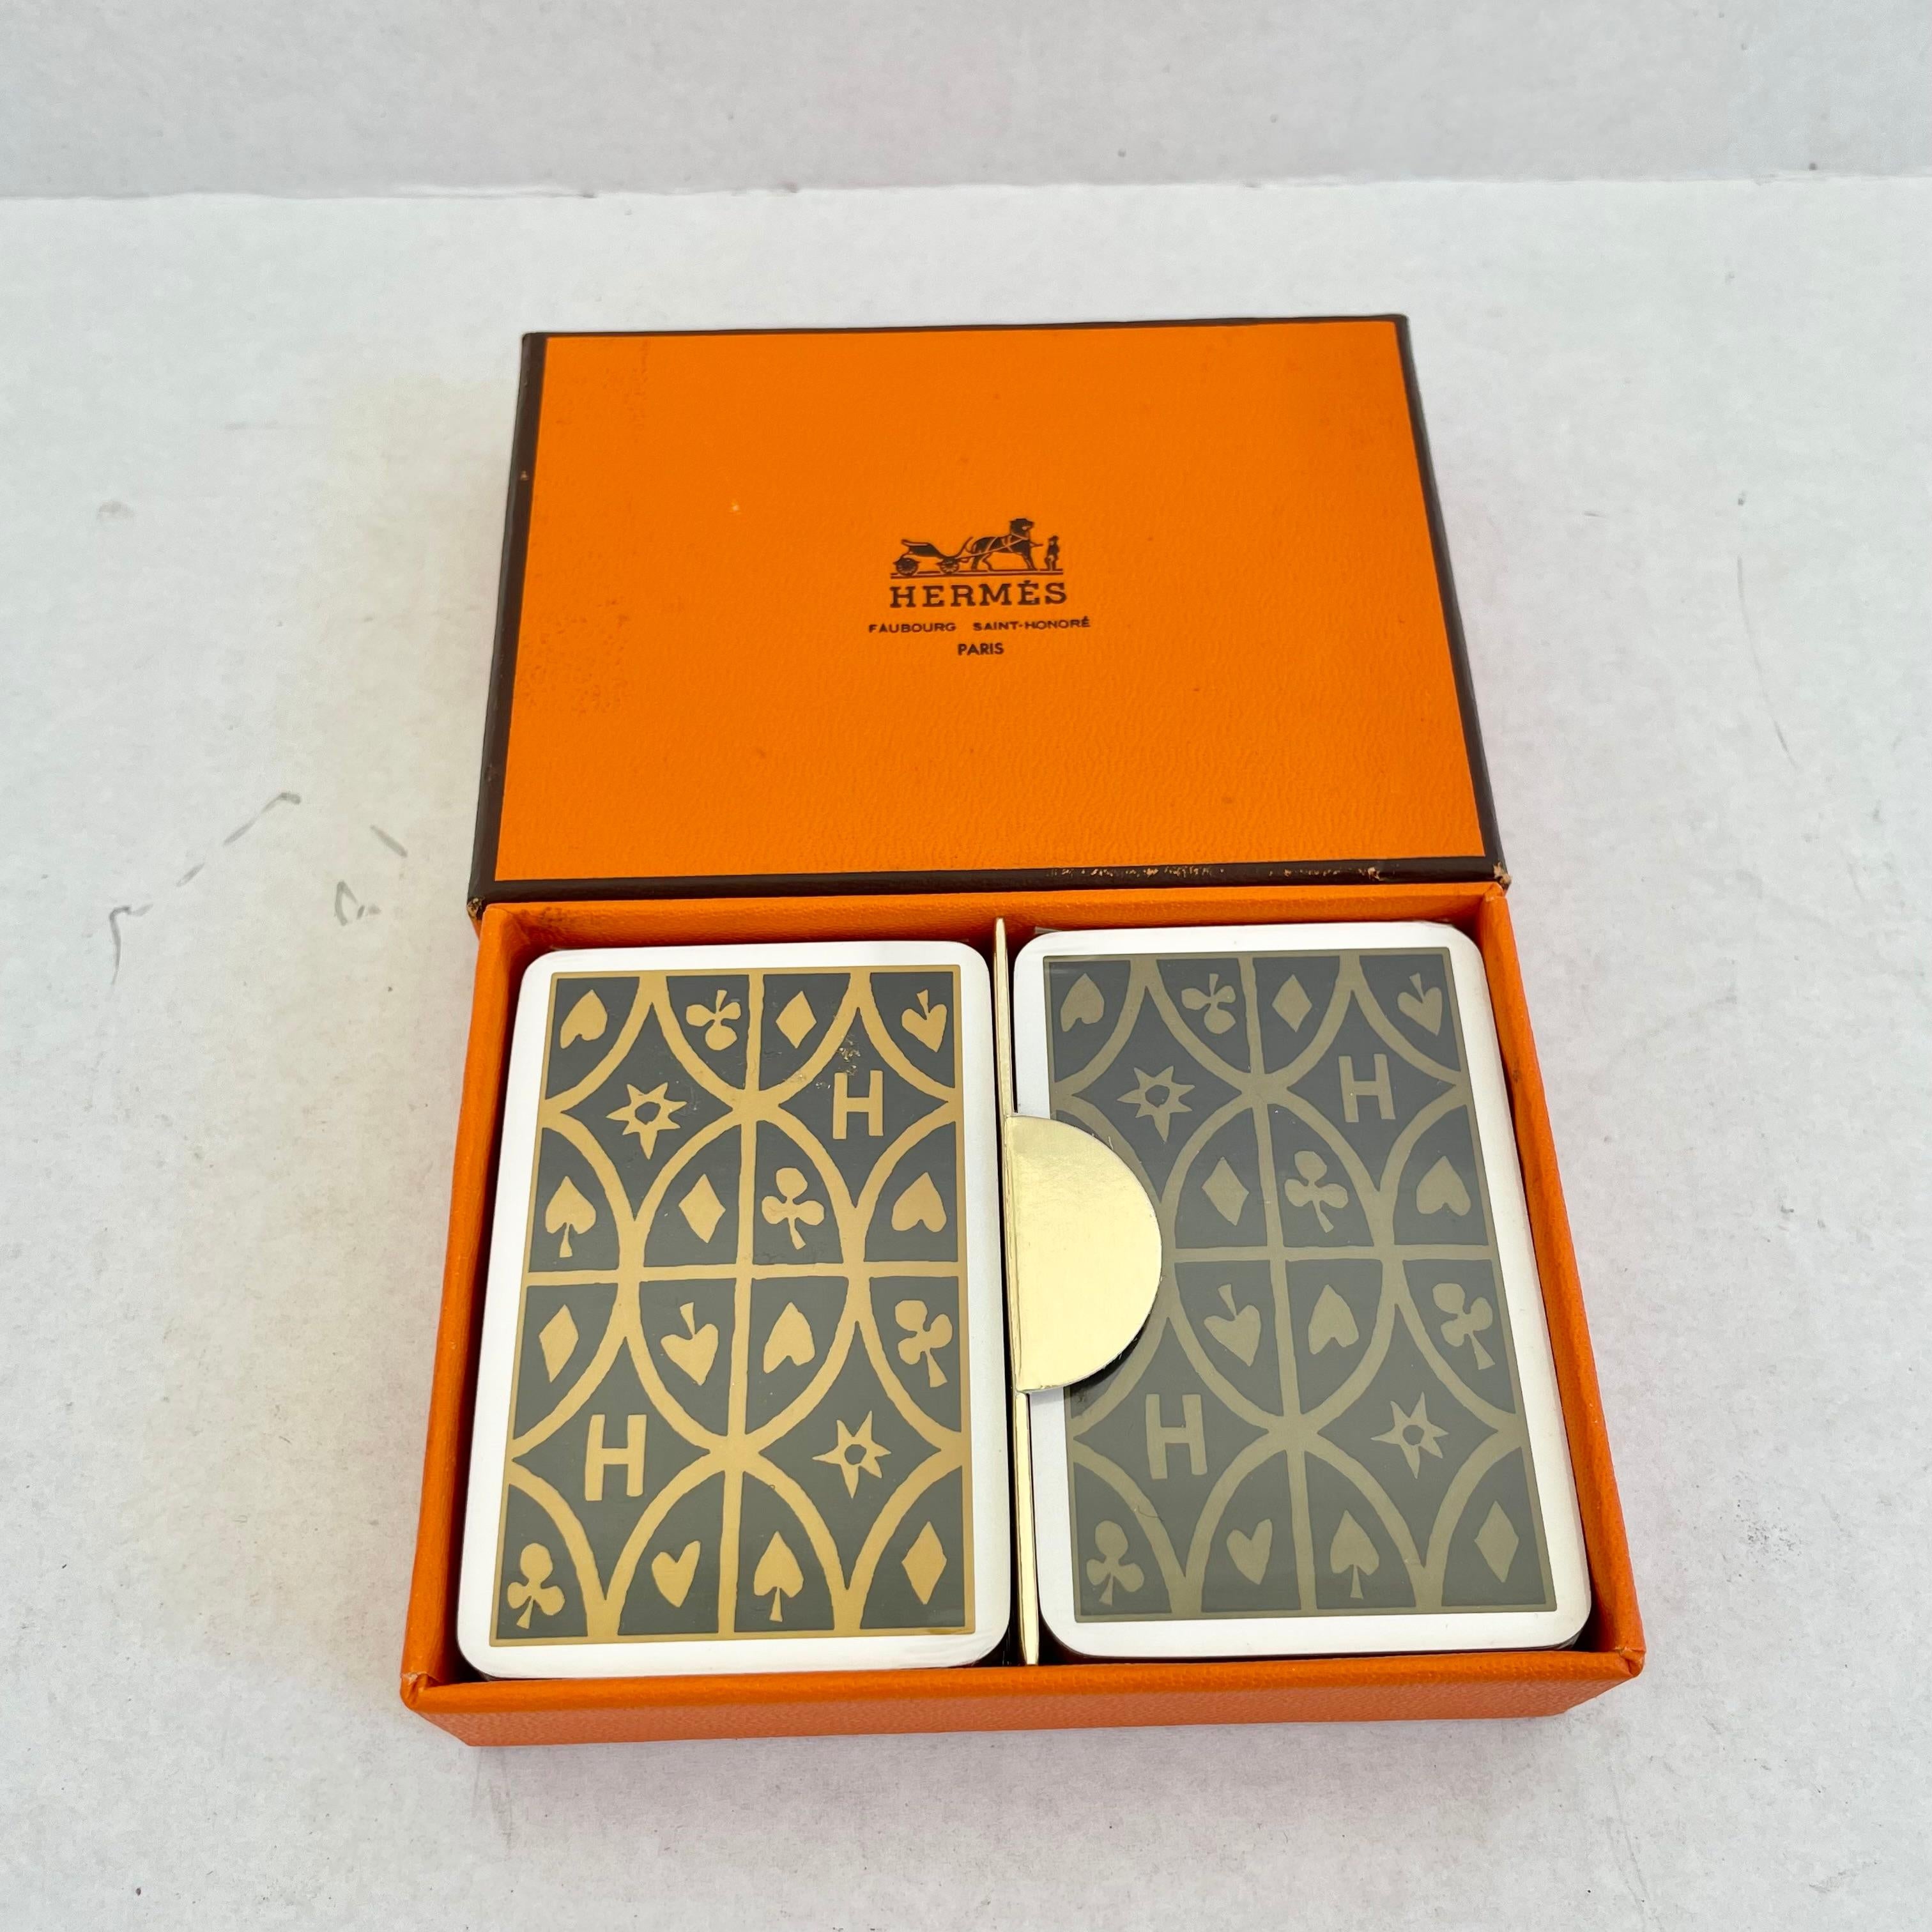 Hermès mini playing cards in the original box and original wrapping. Made in France. Both sets are sealed and unused. Gold gilded edges on both decks. One brown deck and one tan deck each with the Hermès 